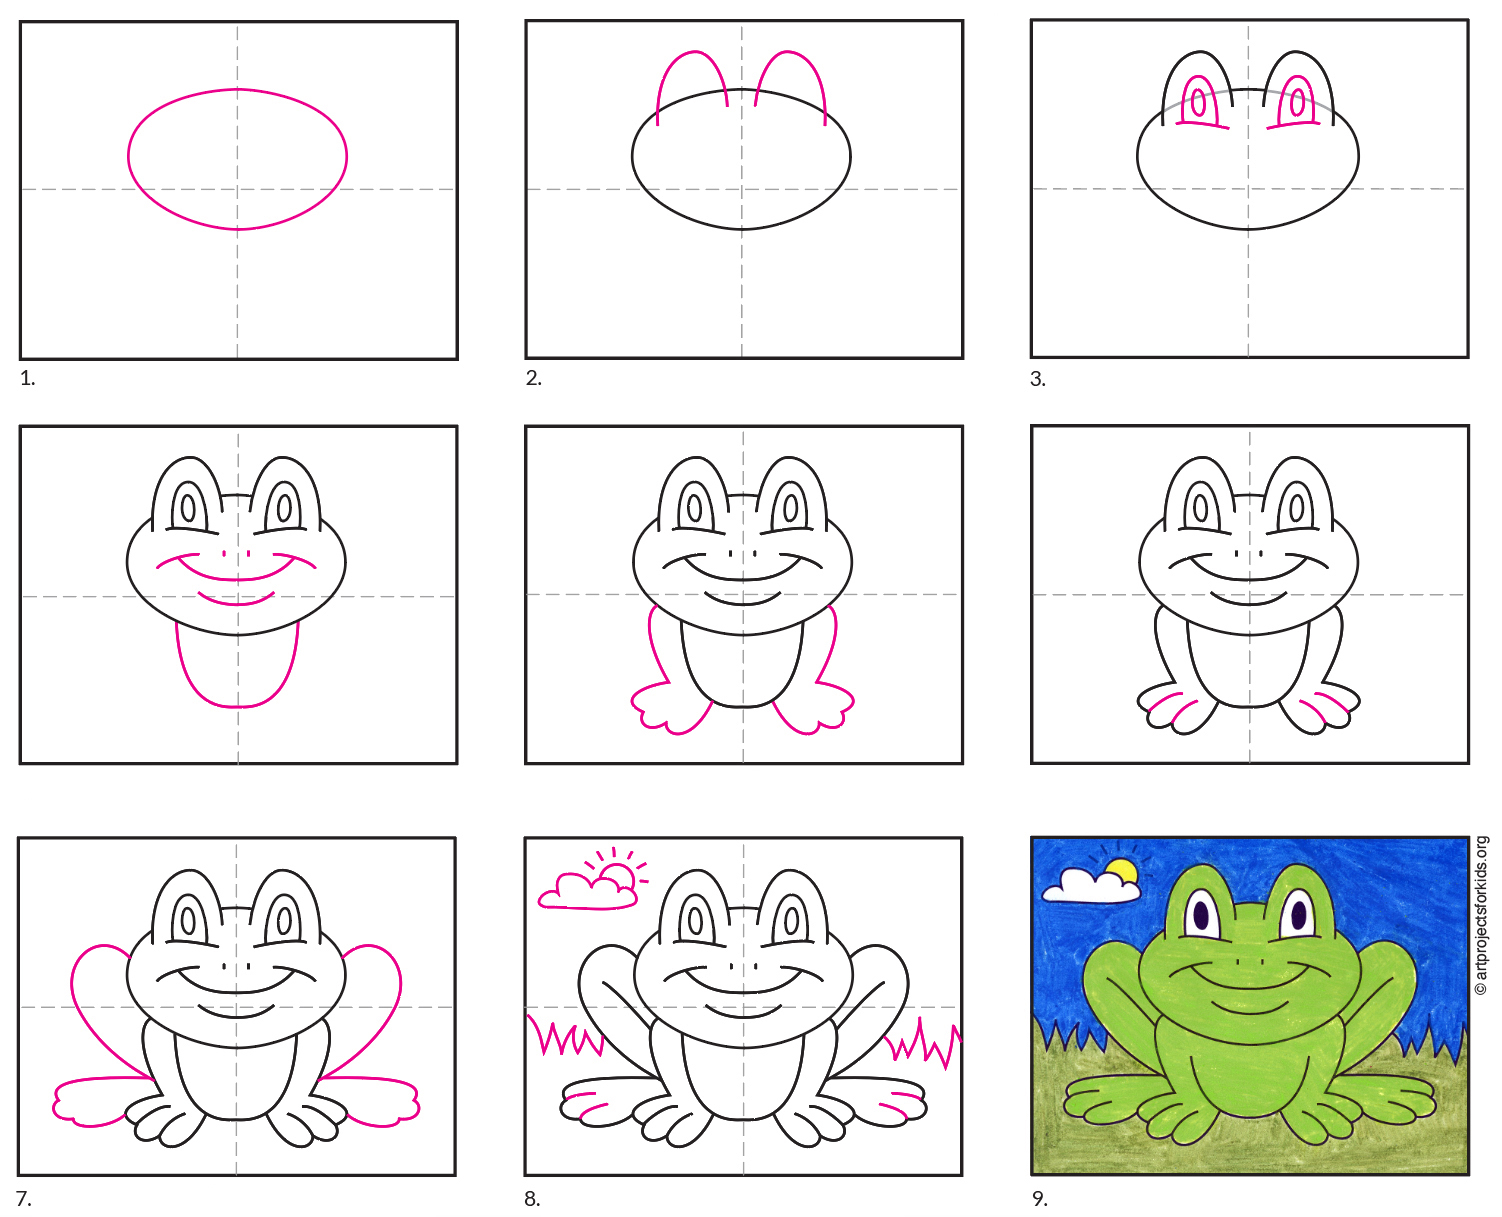 How to Draw a Cartoon Frog · Art Projects for Kids